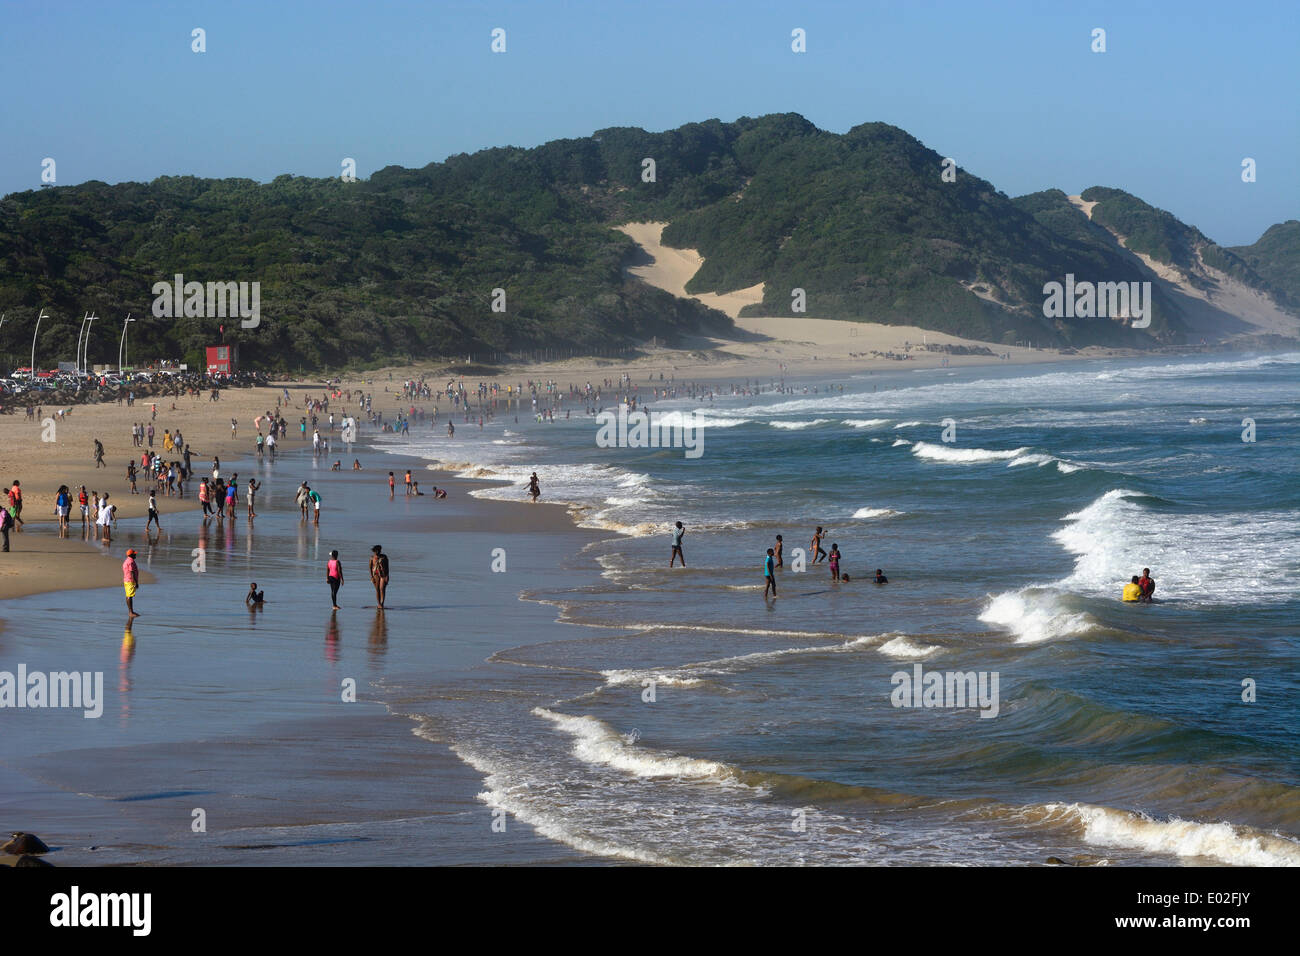 On the beach of East London, Eastern Cape, South Africa Stock Photo